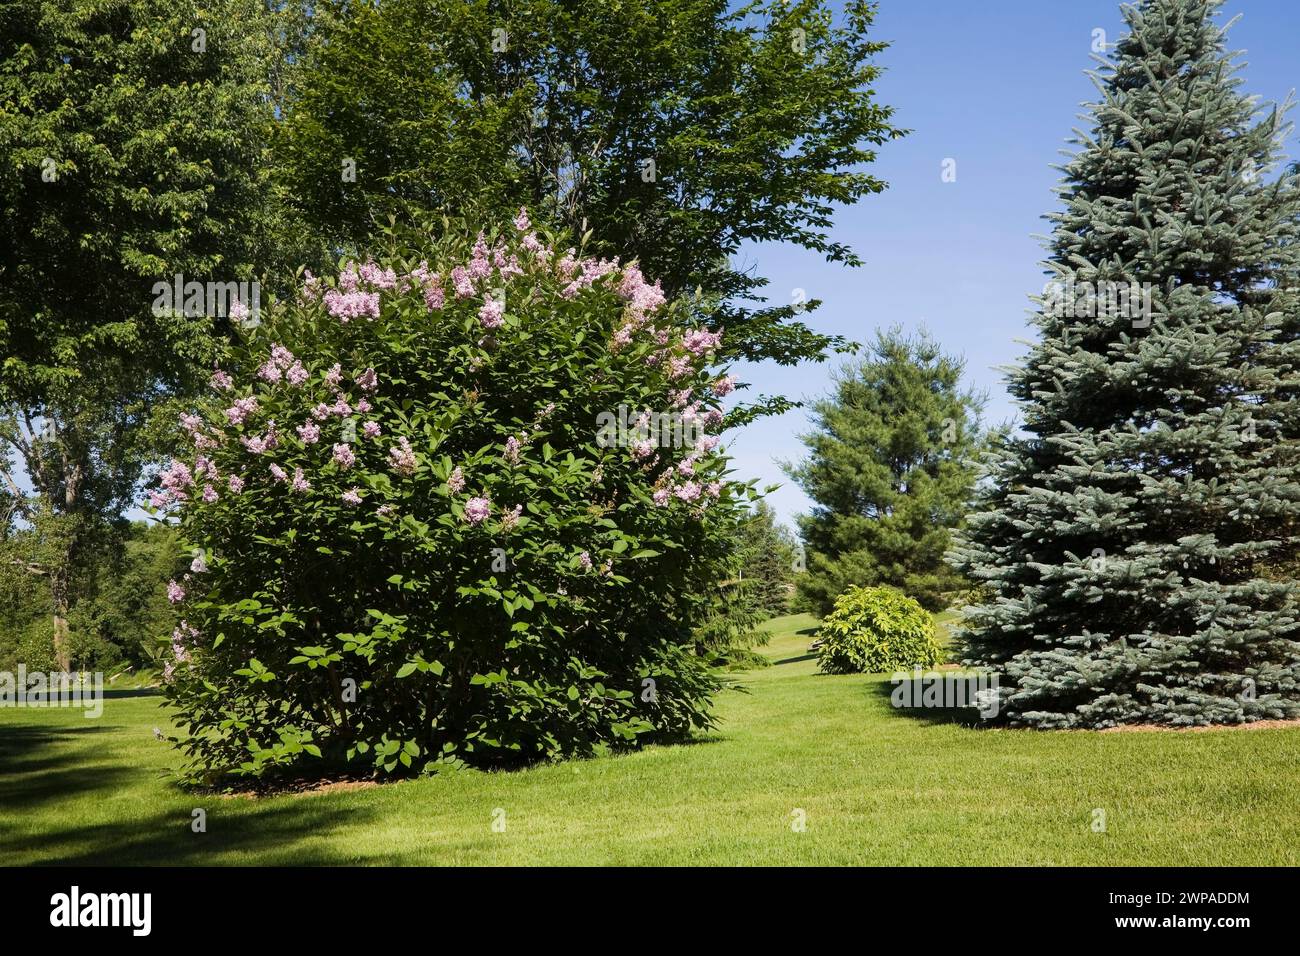 Syringa vulgaris - Lilac and Picea pungens 'Glauca' - Colorado Blue Spruce trees and manicured green grass lawn in backyard garden in late spring. Stock Photo